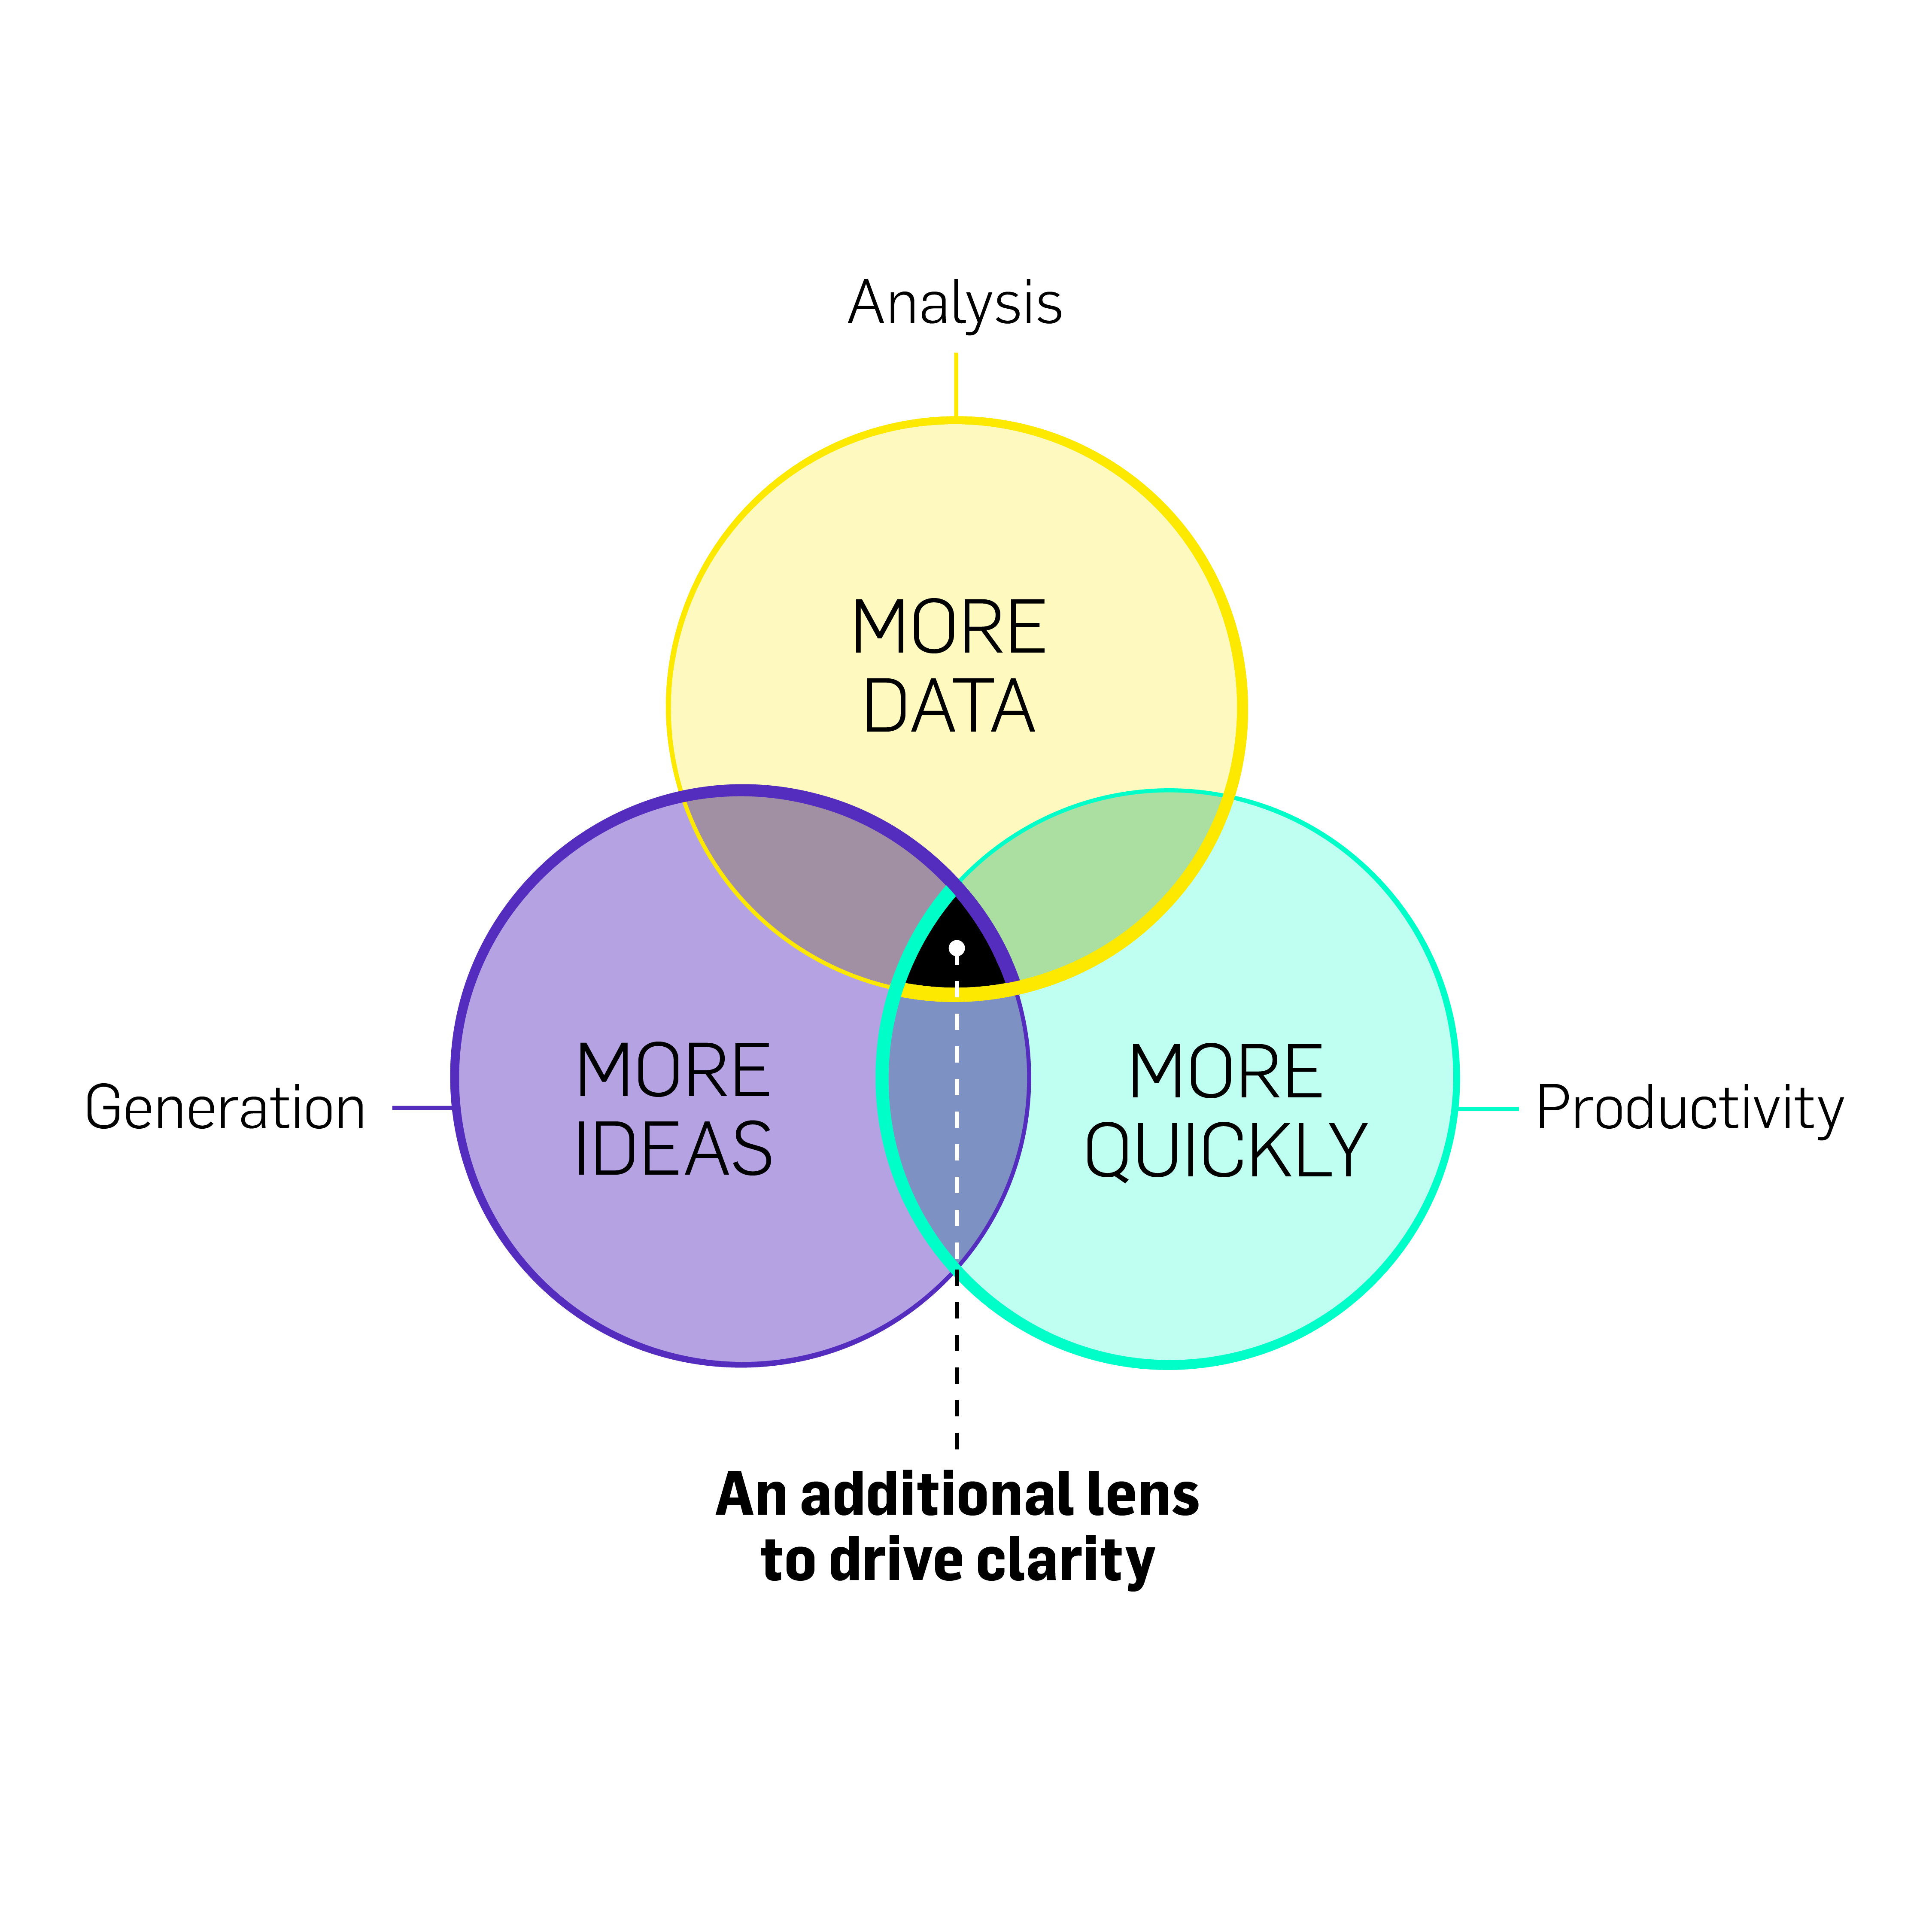 A Venn diagram with 3 intersecting circles showing how to unlock the power of AI. The purple circle reads "more ideas" (representing Generation/Creativity), the yellow circle reads "more data" (representing Analysis/Insight), and the teal circle reads "more quickly" (representing Productivity/Application). A dotted line drops from the intersection point to the bottom of the diagram, reading "An additional lens to drive clarity: Artificial Intelligence."